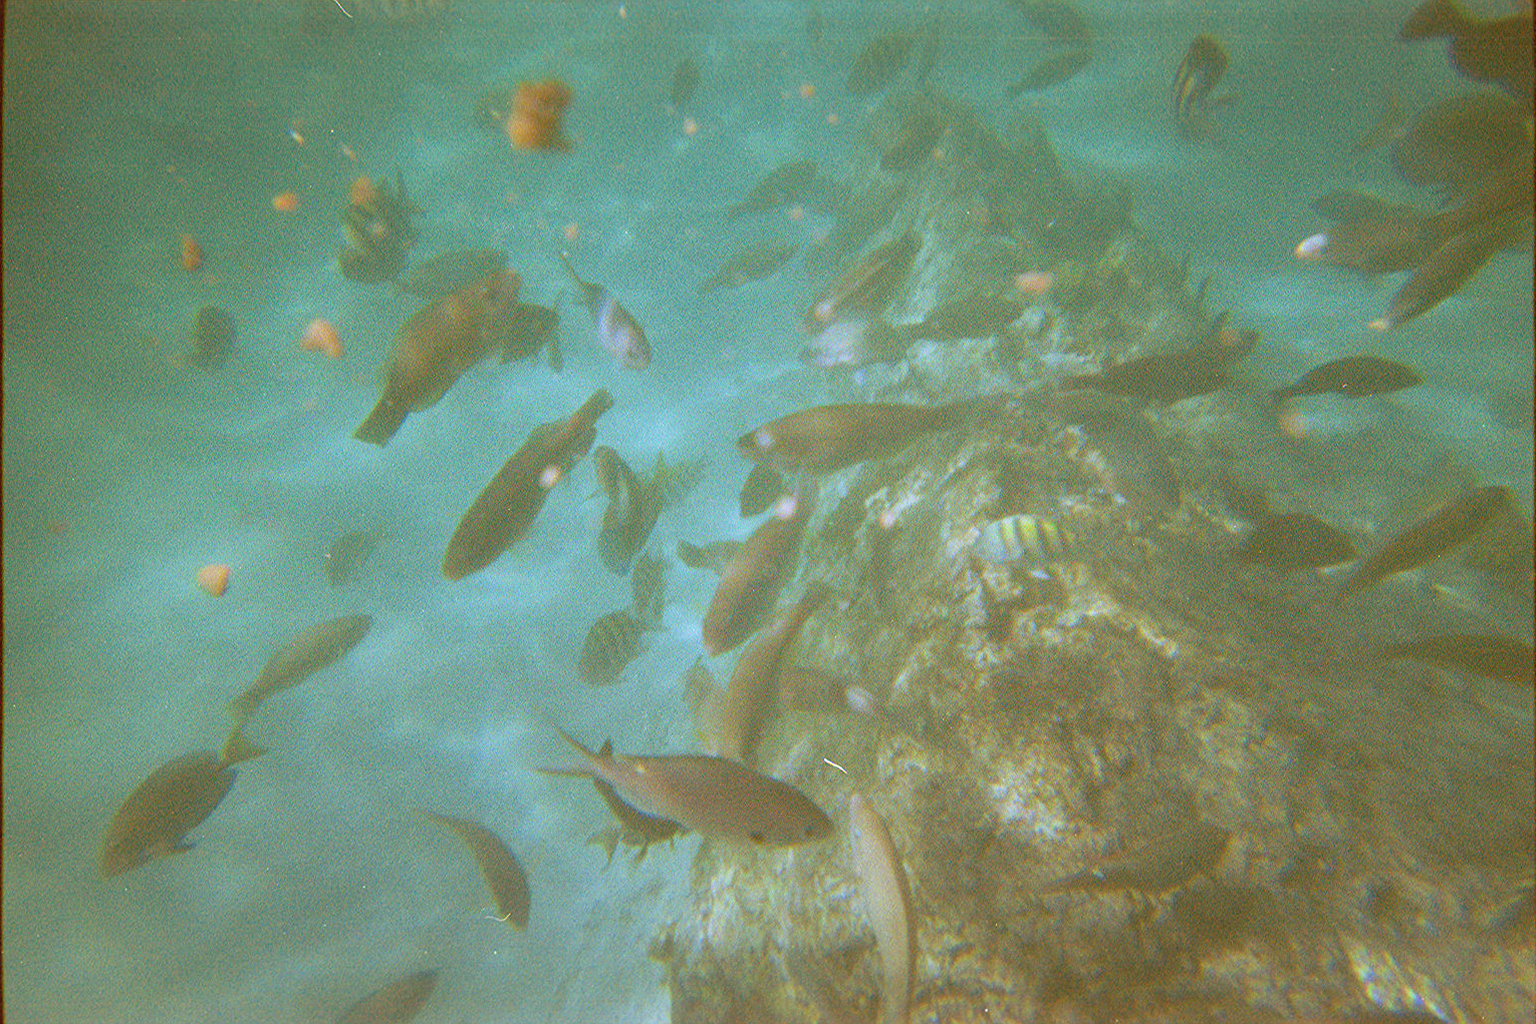 Jacob and I went Snuba diving. We took this picture from under the sea. David also came with us